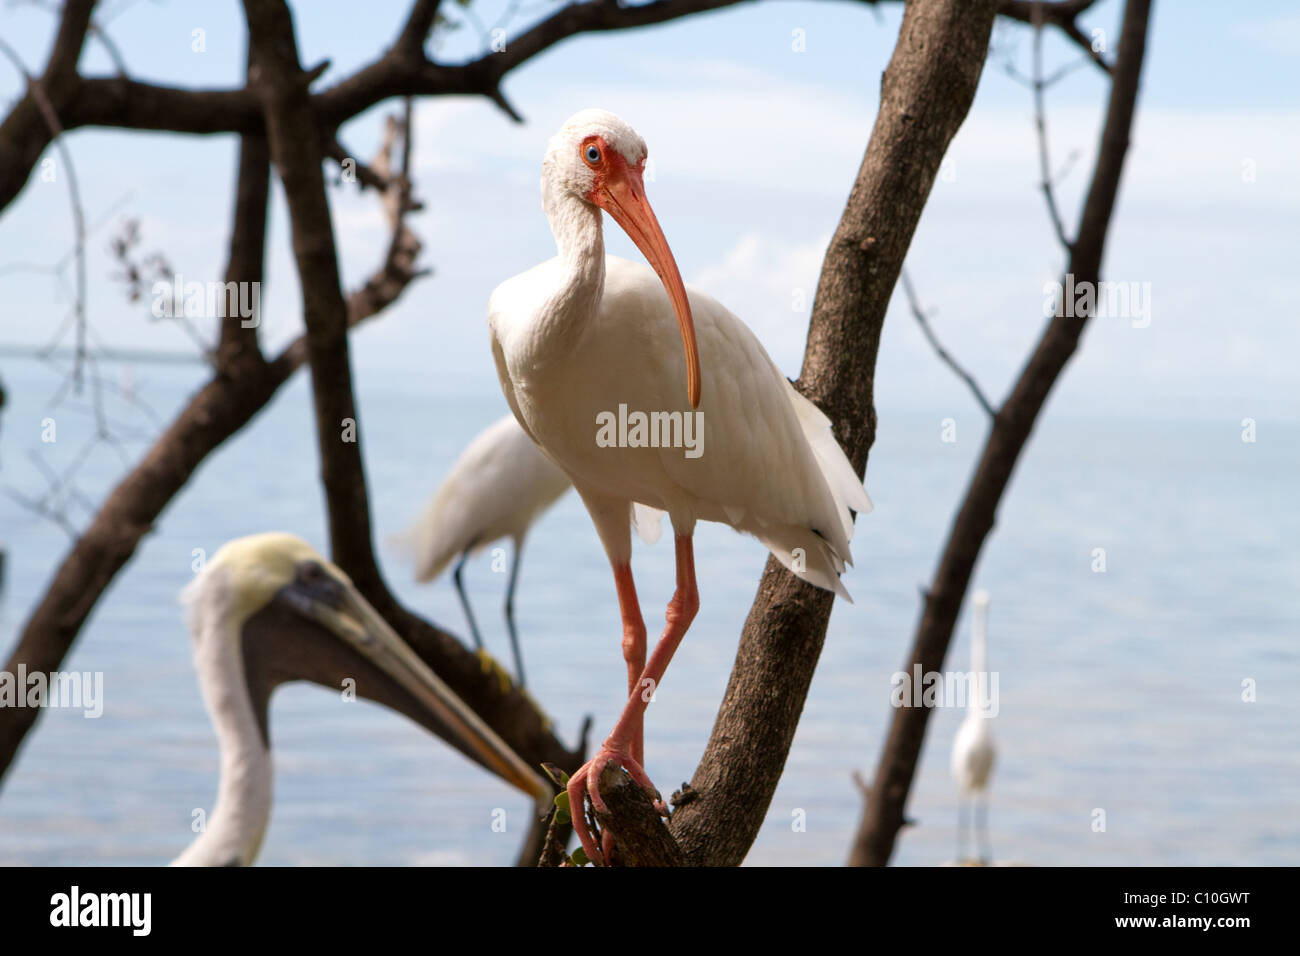 White Ibis bird perched on a tree by the water at a wildlife sanctuary. Stock Photo